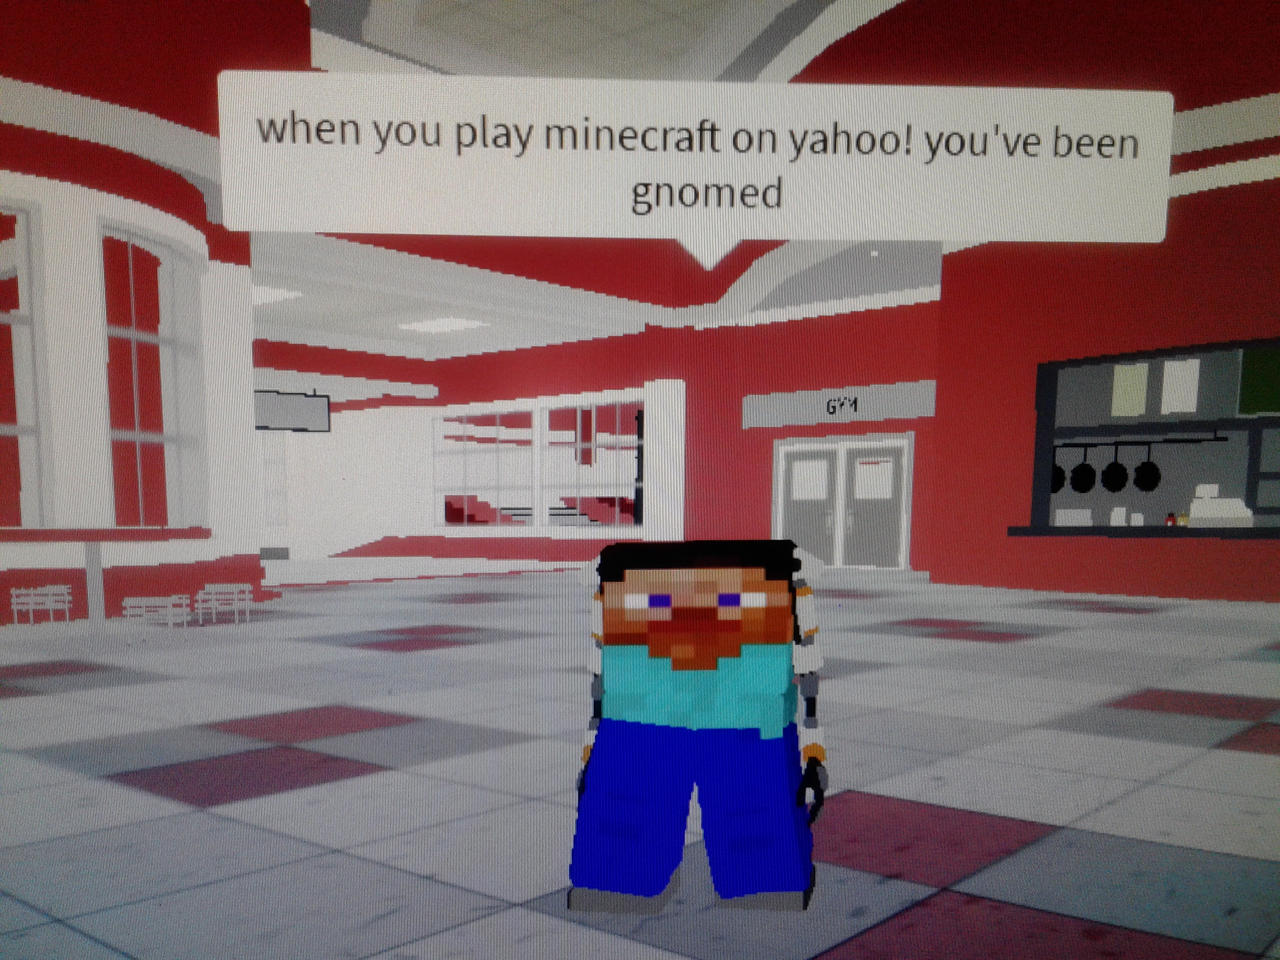 Cursed Roblox Player By Jumpscarez On Deviantart - roblox player jumping